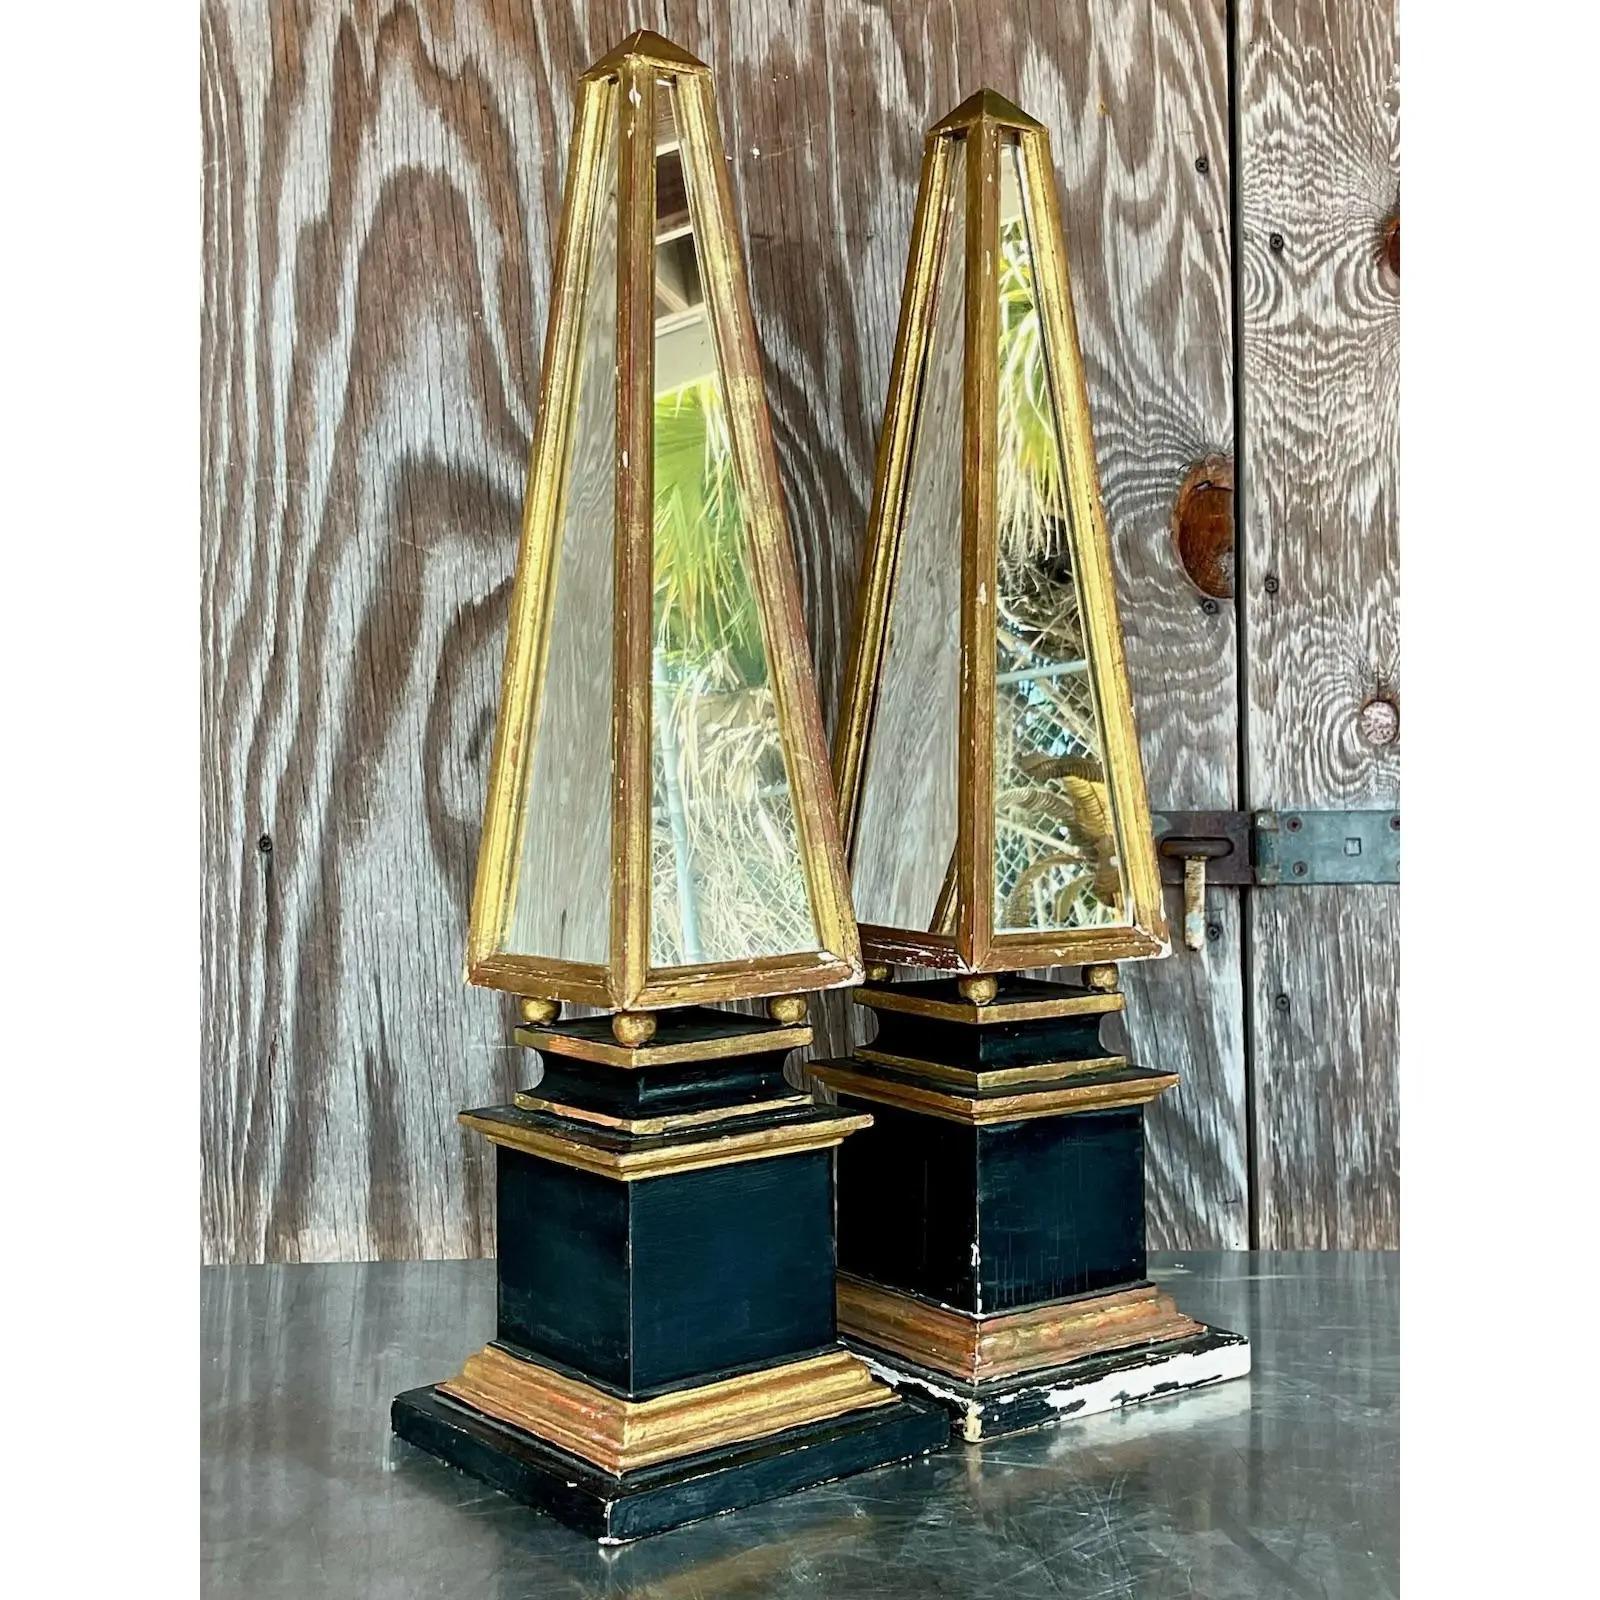 A fabulous pair of vintage giltwood and mirror obelisks in gold and black. Each obelisks is two separate pieces. The top is attached to the bottom. Acquired at a Palm Beach estate.